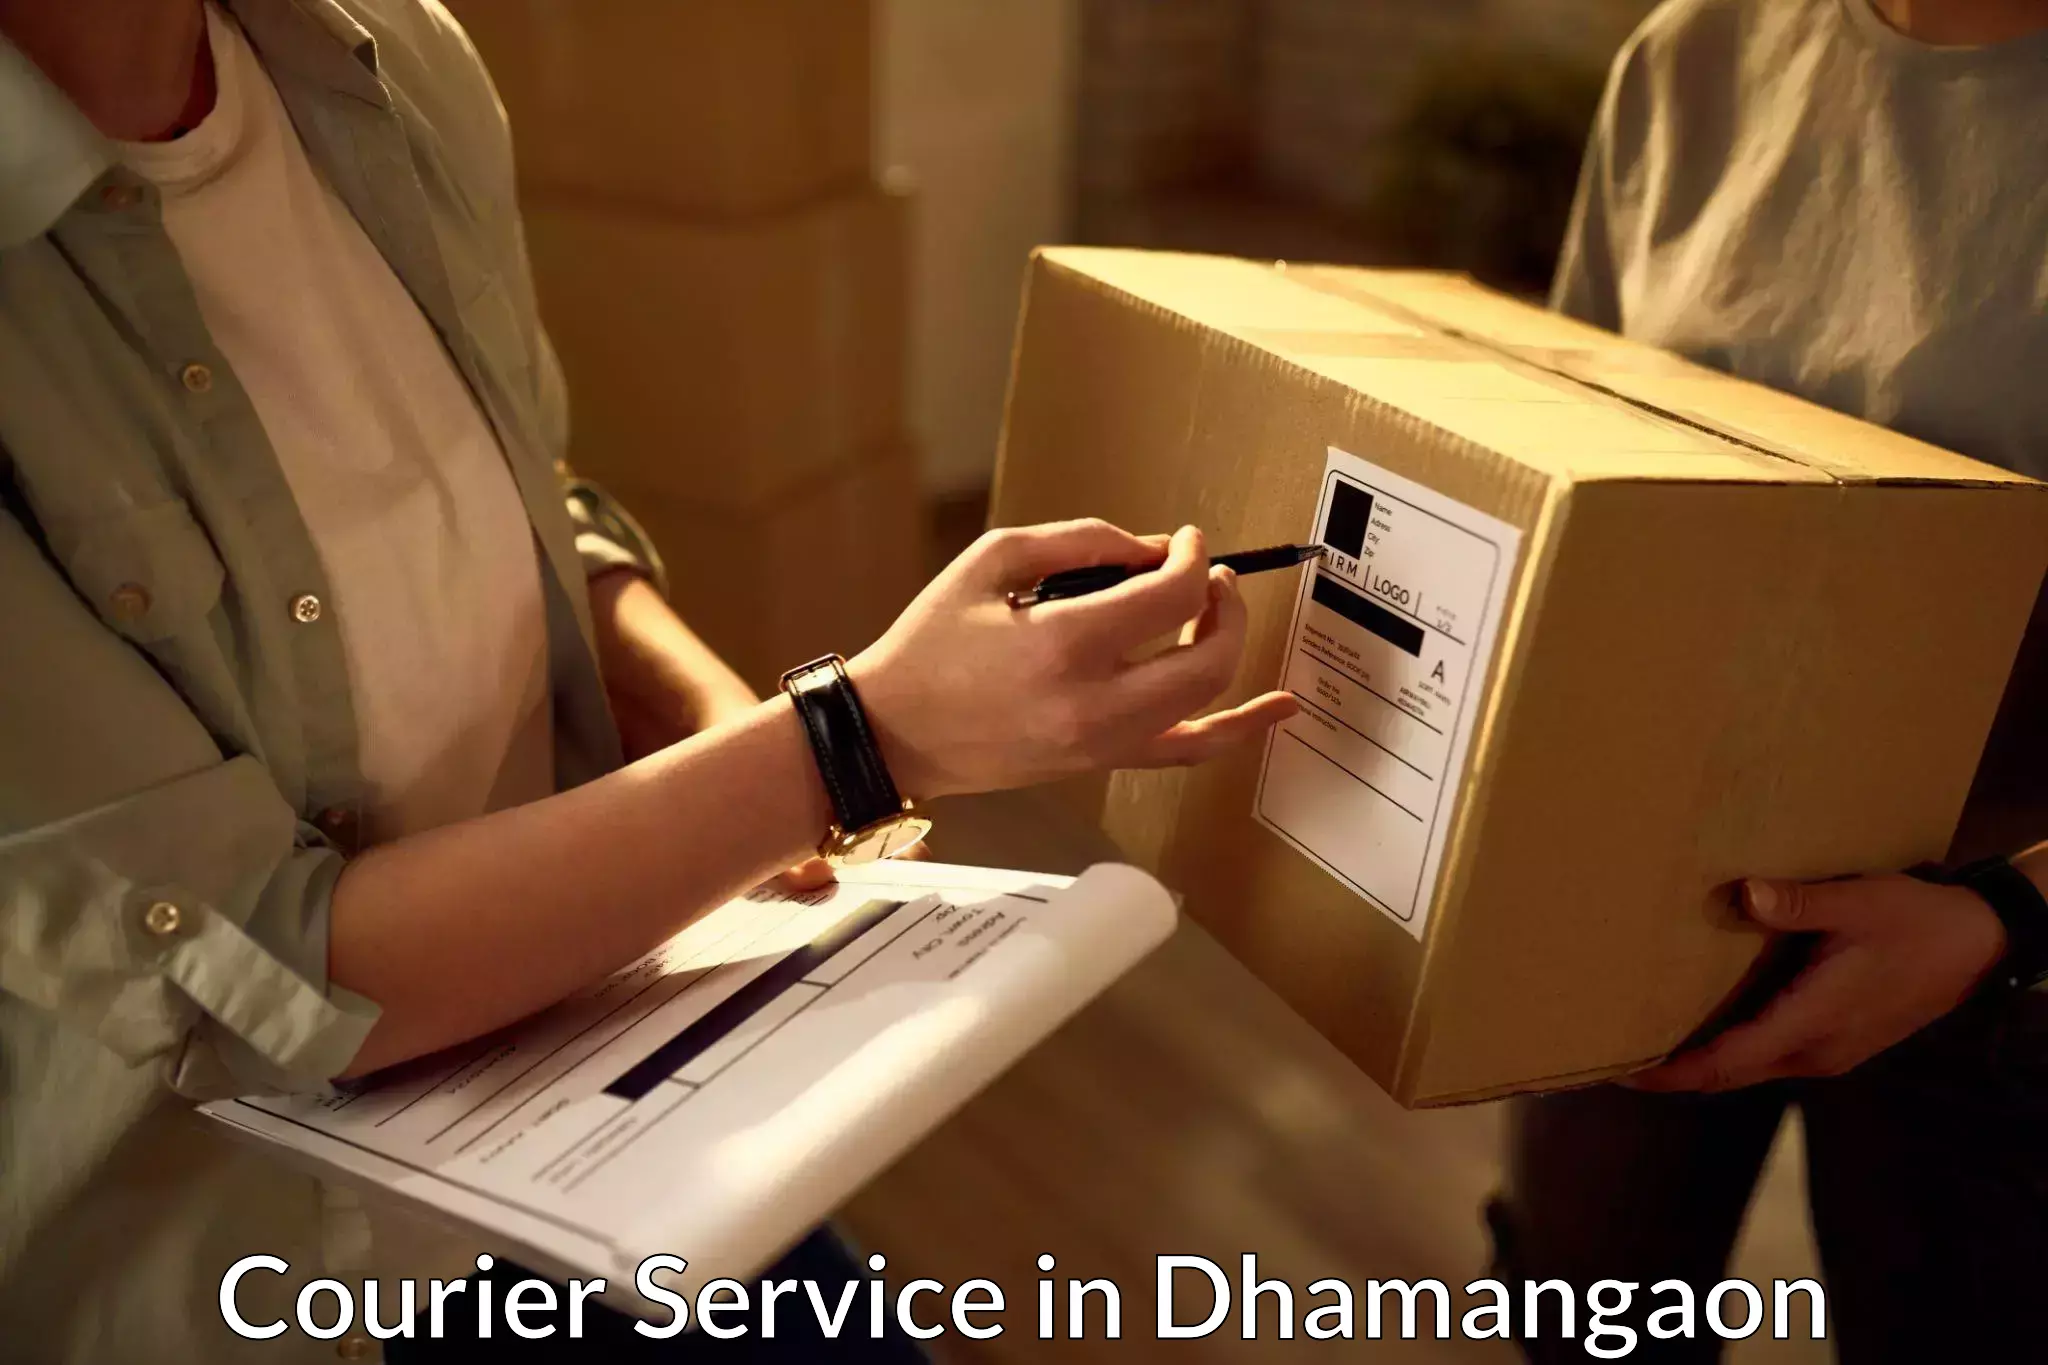 Delivery service partnership in Dhamangaon